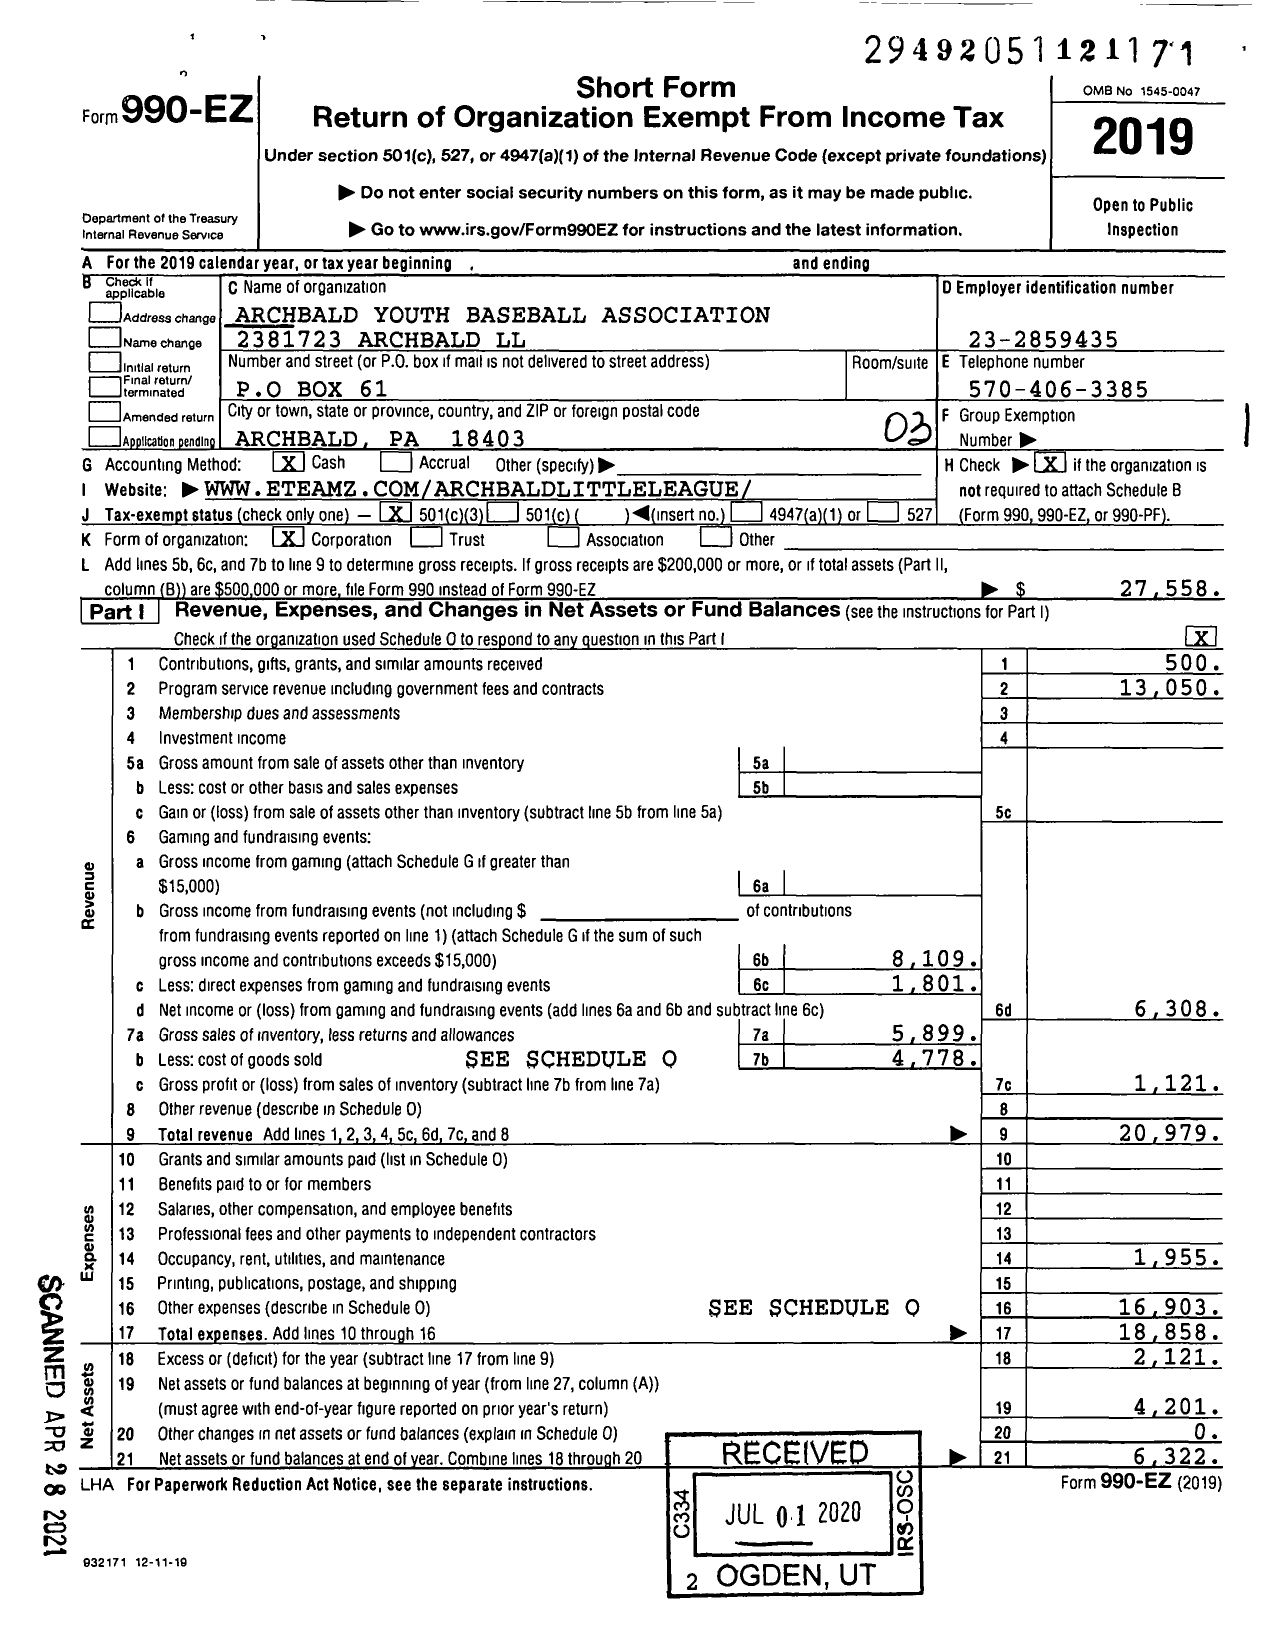 Image of first page of 2019 Form 990EZ for Little League Baseball - 2381723 Archbald LL